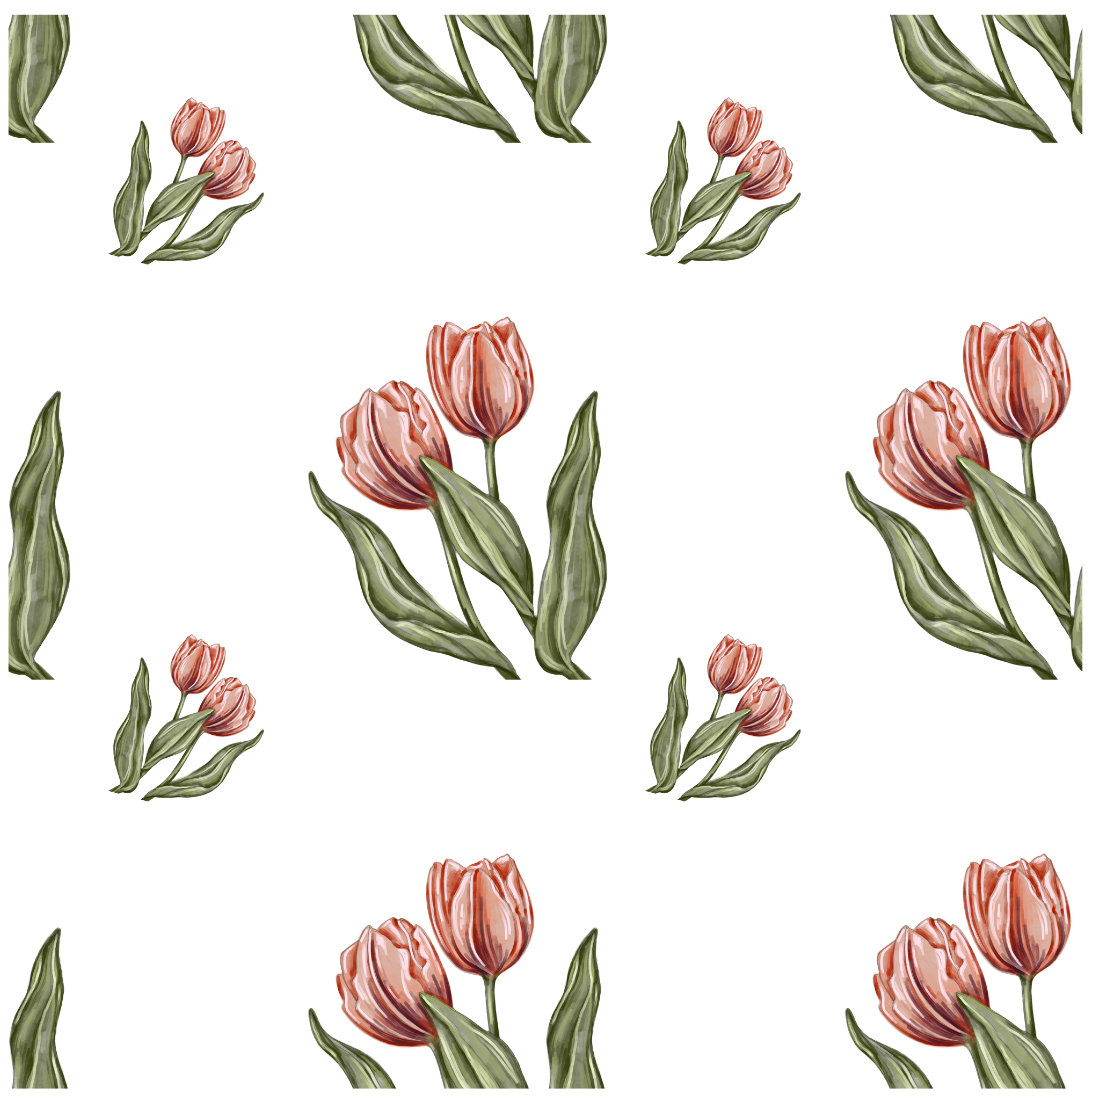 Pattern of pink tulips on a white background.